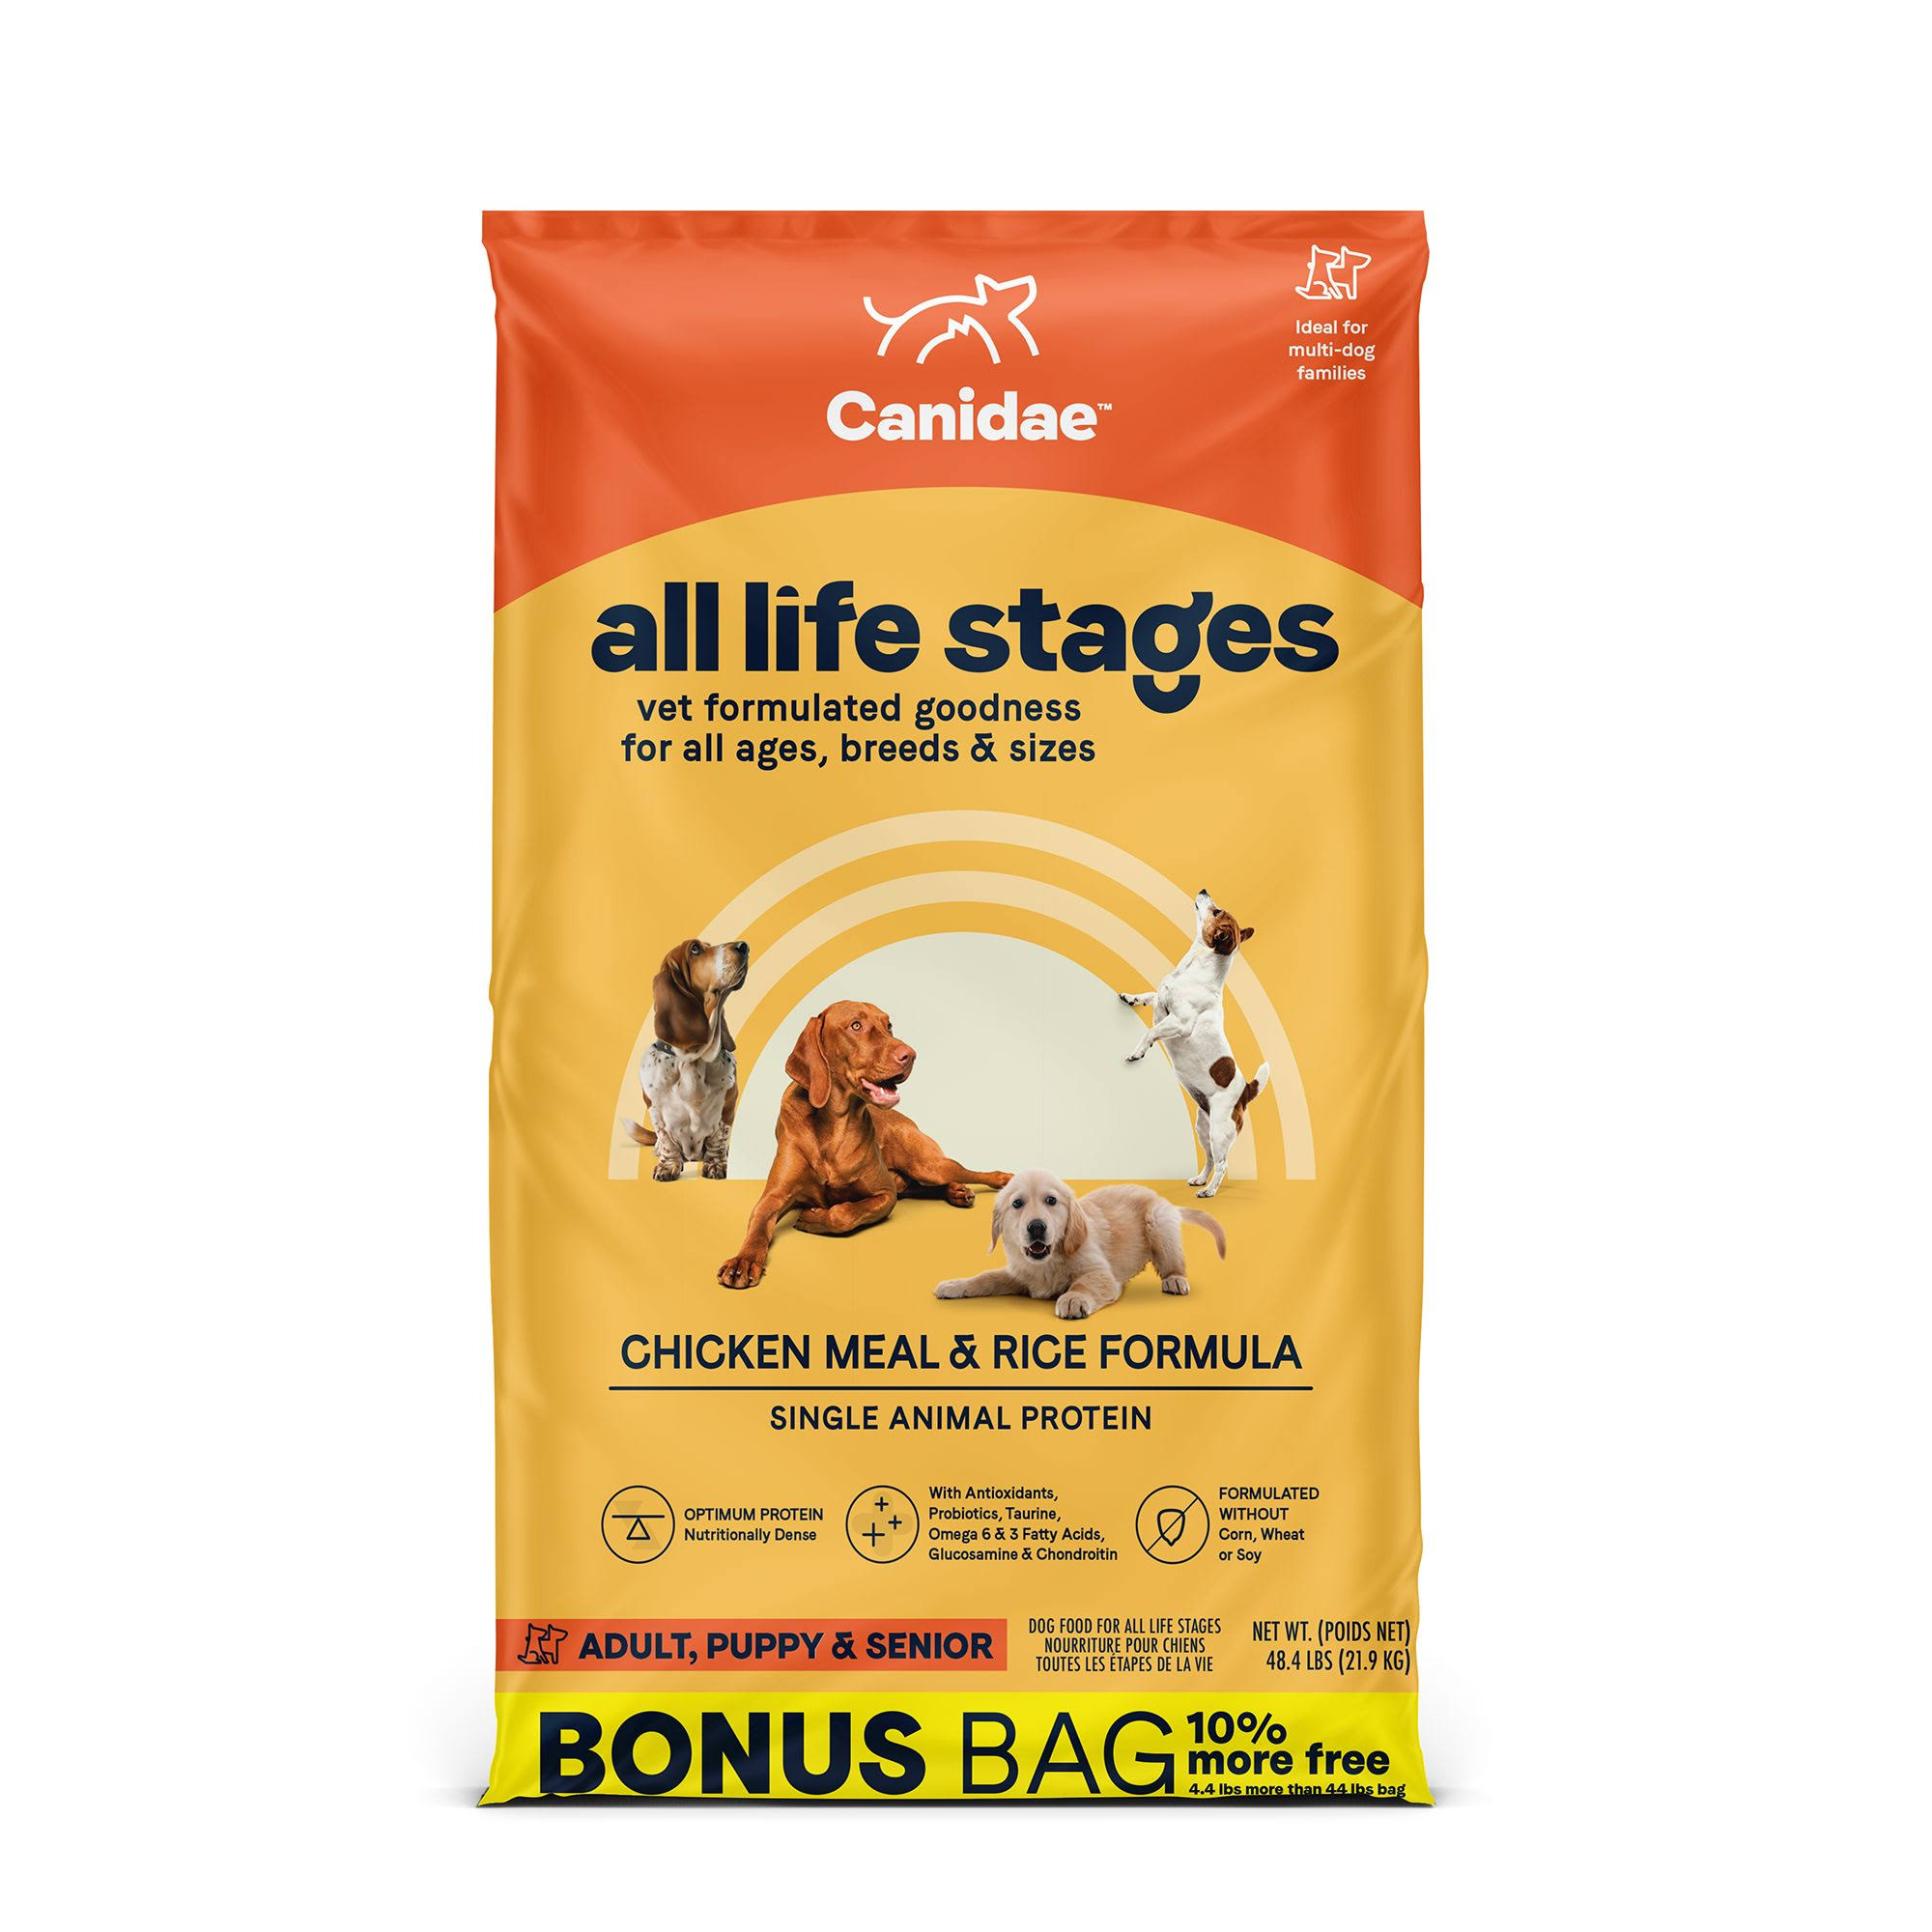 Canidae All Life Stages Chicken Meal & Rice Formula Dog Food - 48.4 lb